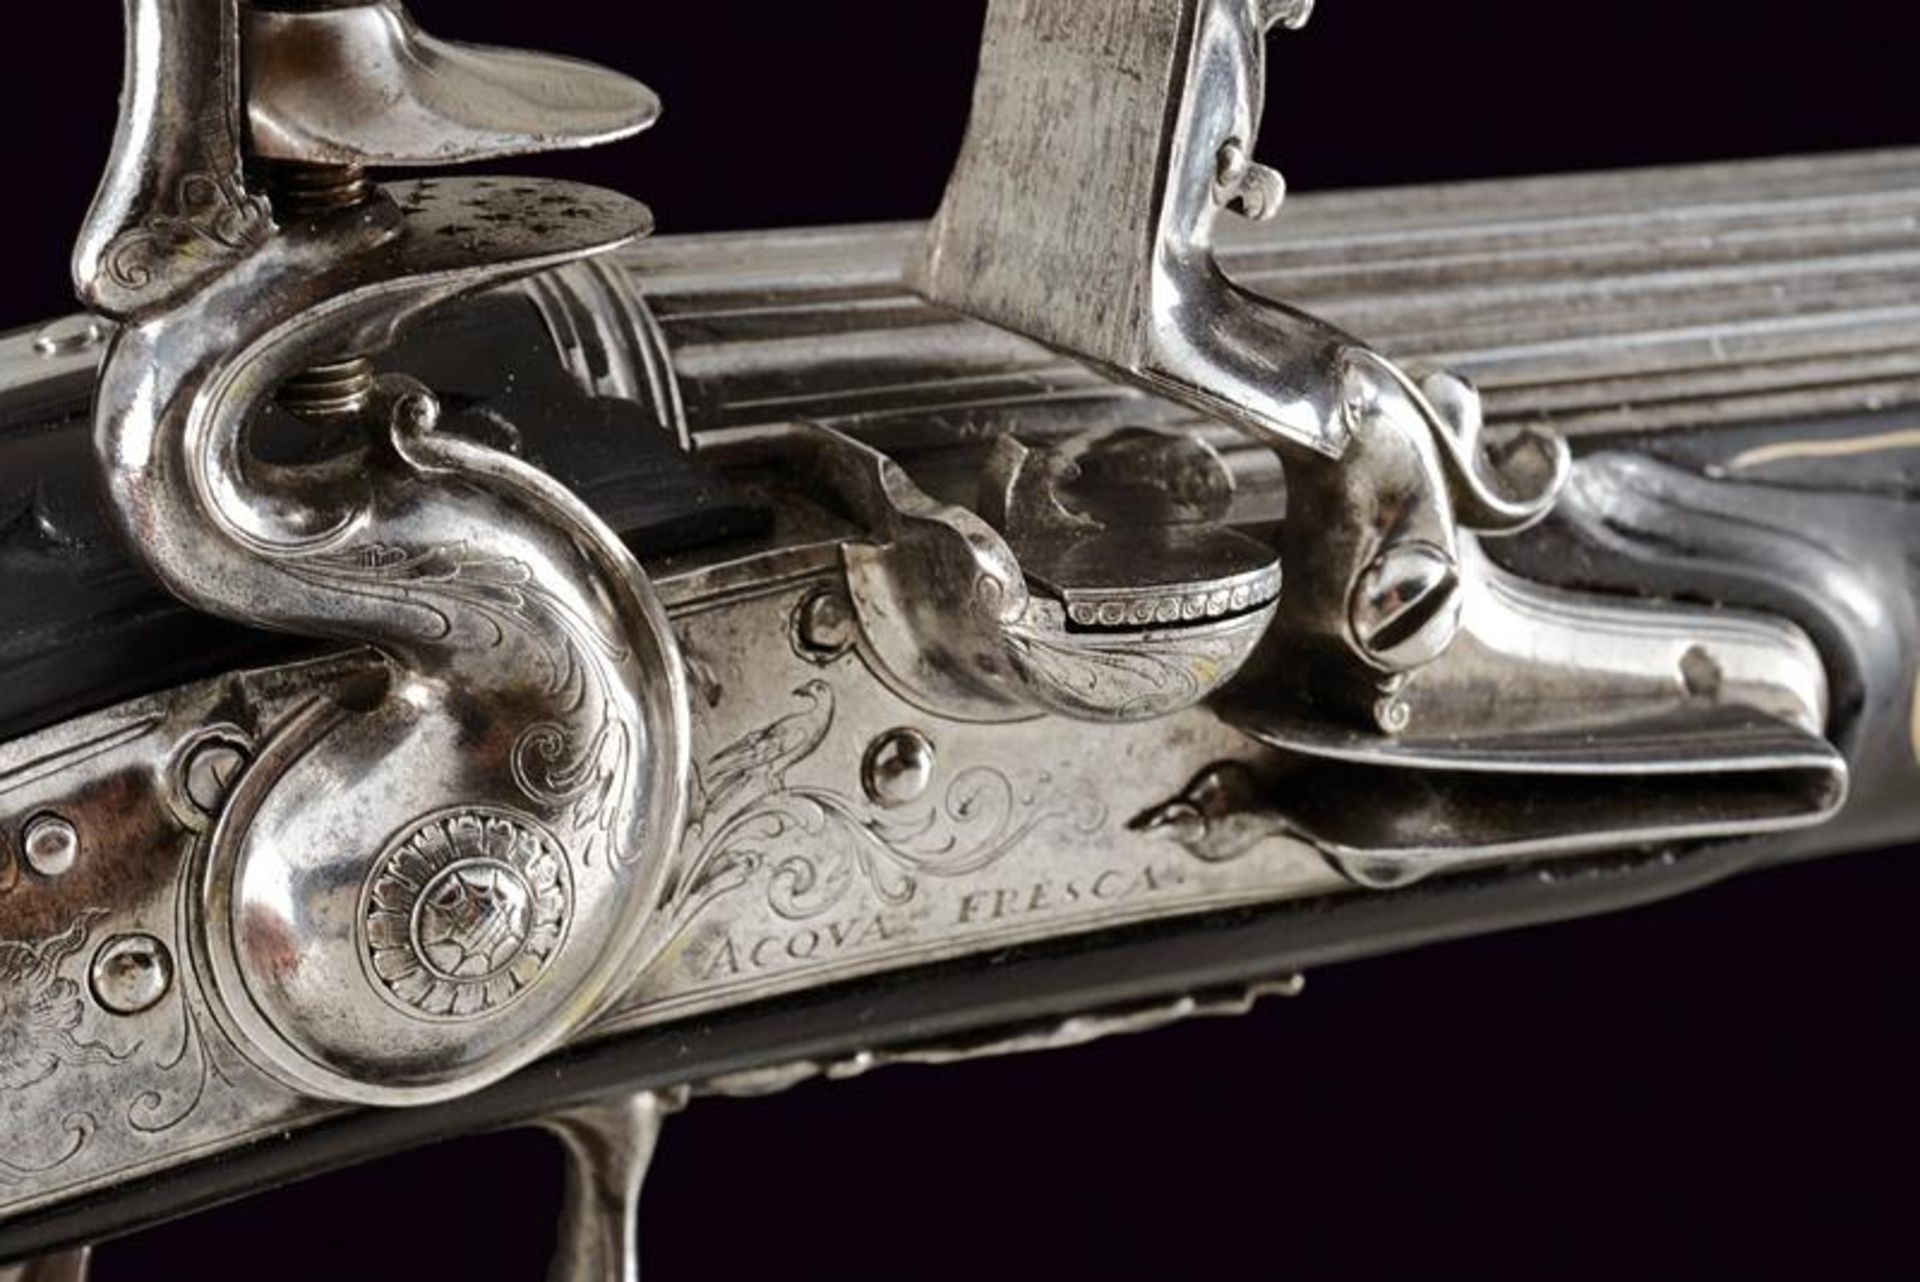 An important pair of flintlock pistols by Acqua Fresca - Image 11 of 16